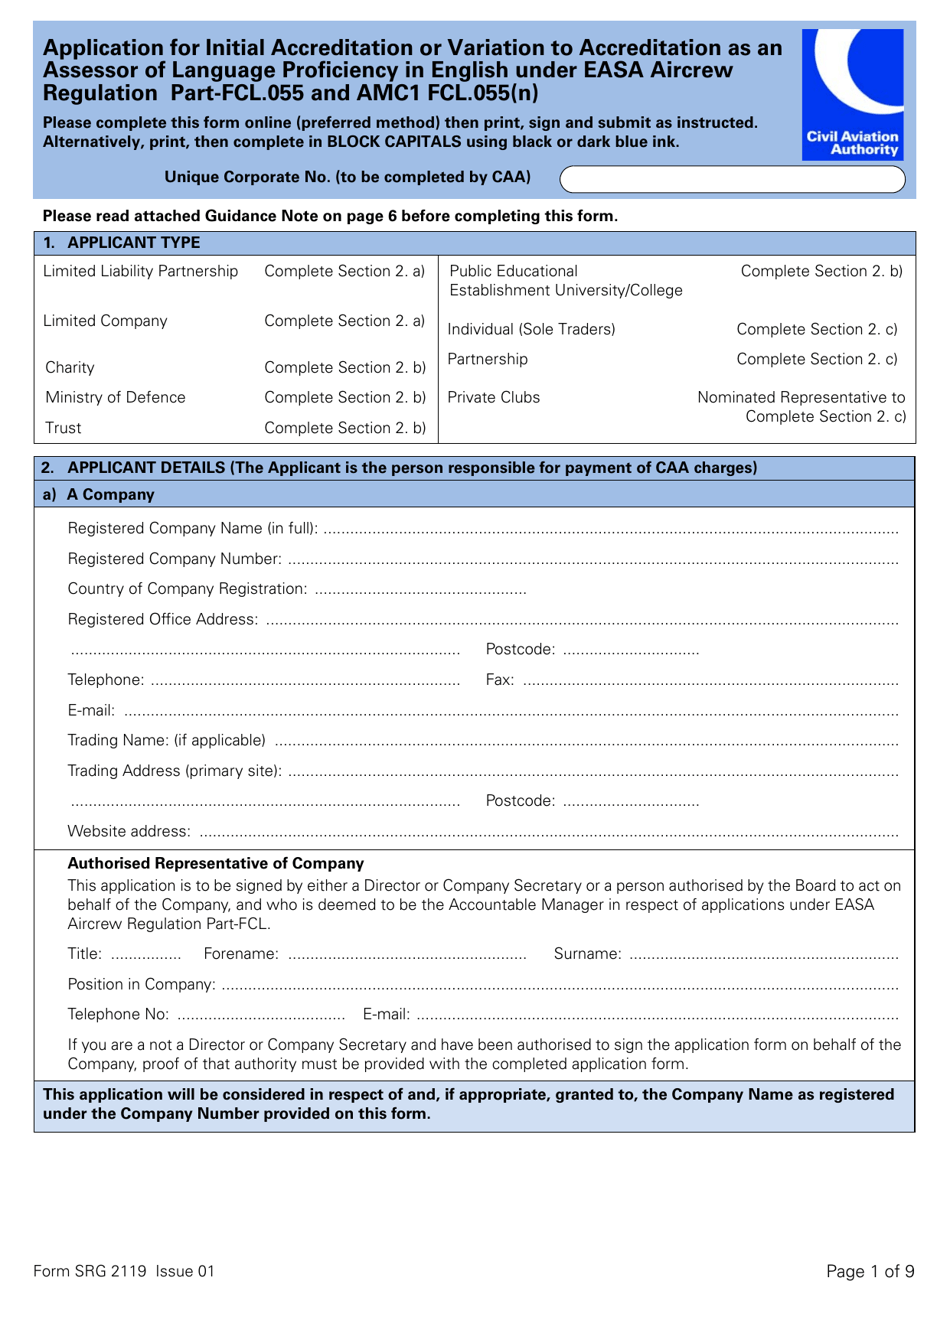 Form SRG2119 Application for Initial Accreditation or Variation to Accreditation as an Assessor of Language Proficiency in English Under Easa Aircrew Regulation Part-Fcl.055 and Amc1 Fcl.055(N) - United Kingdom, Page 1